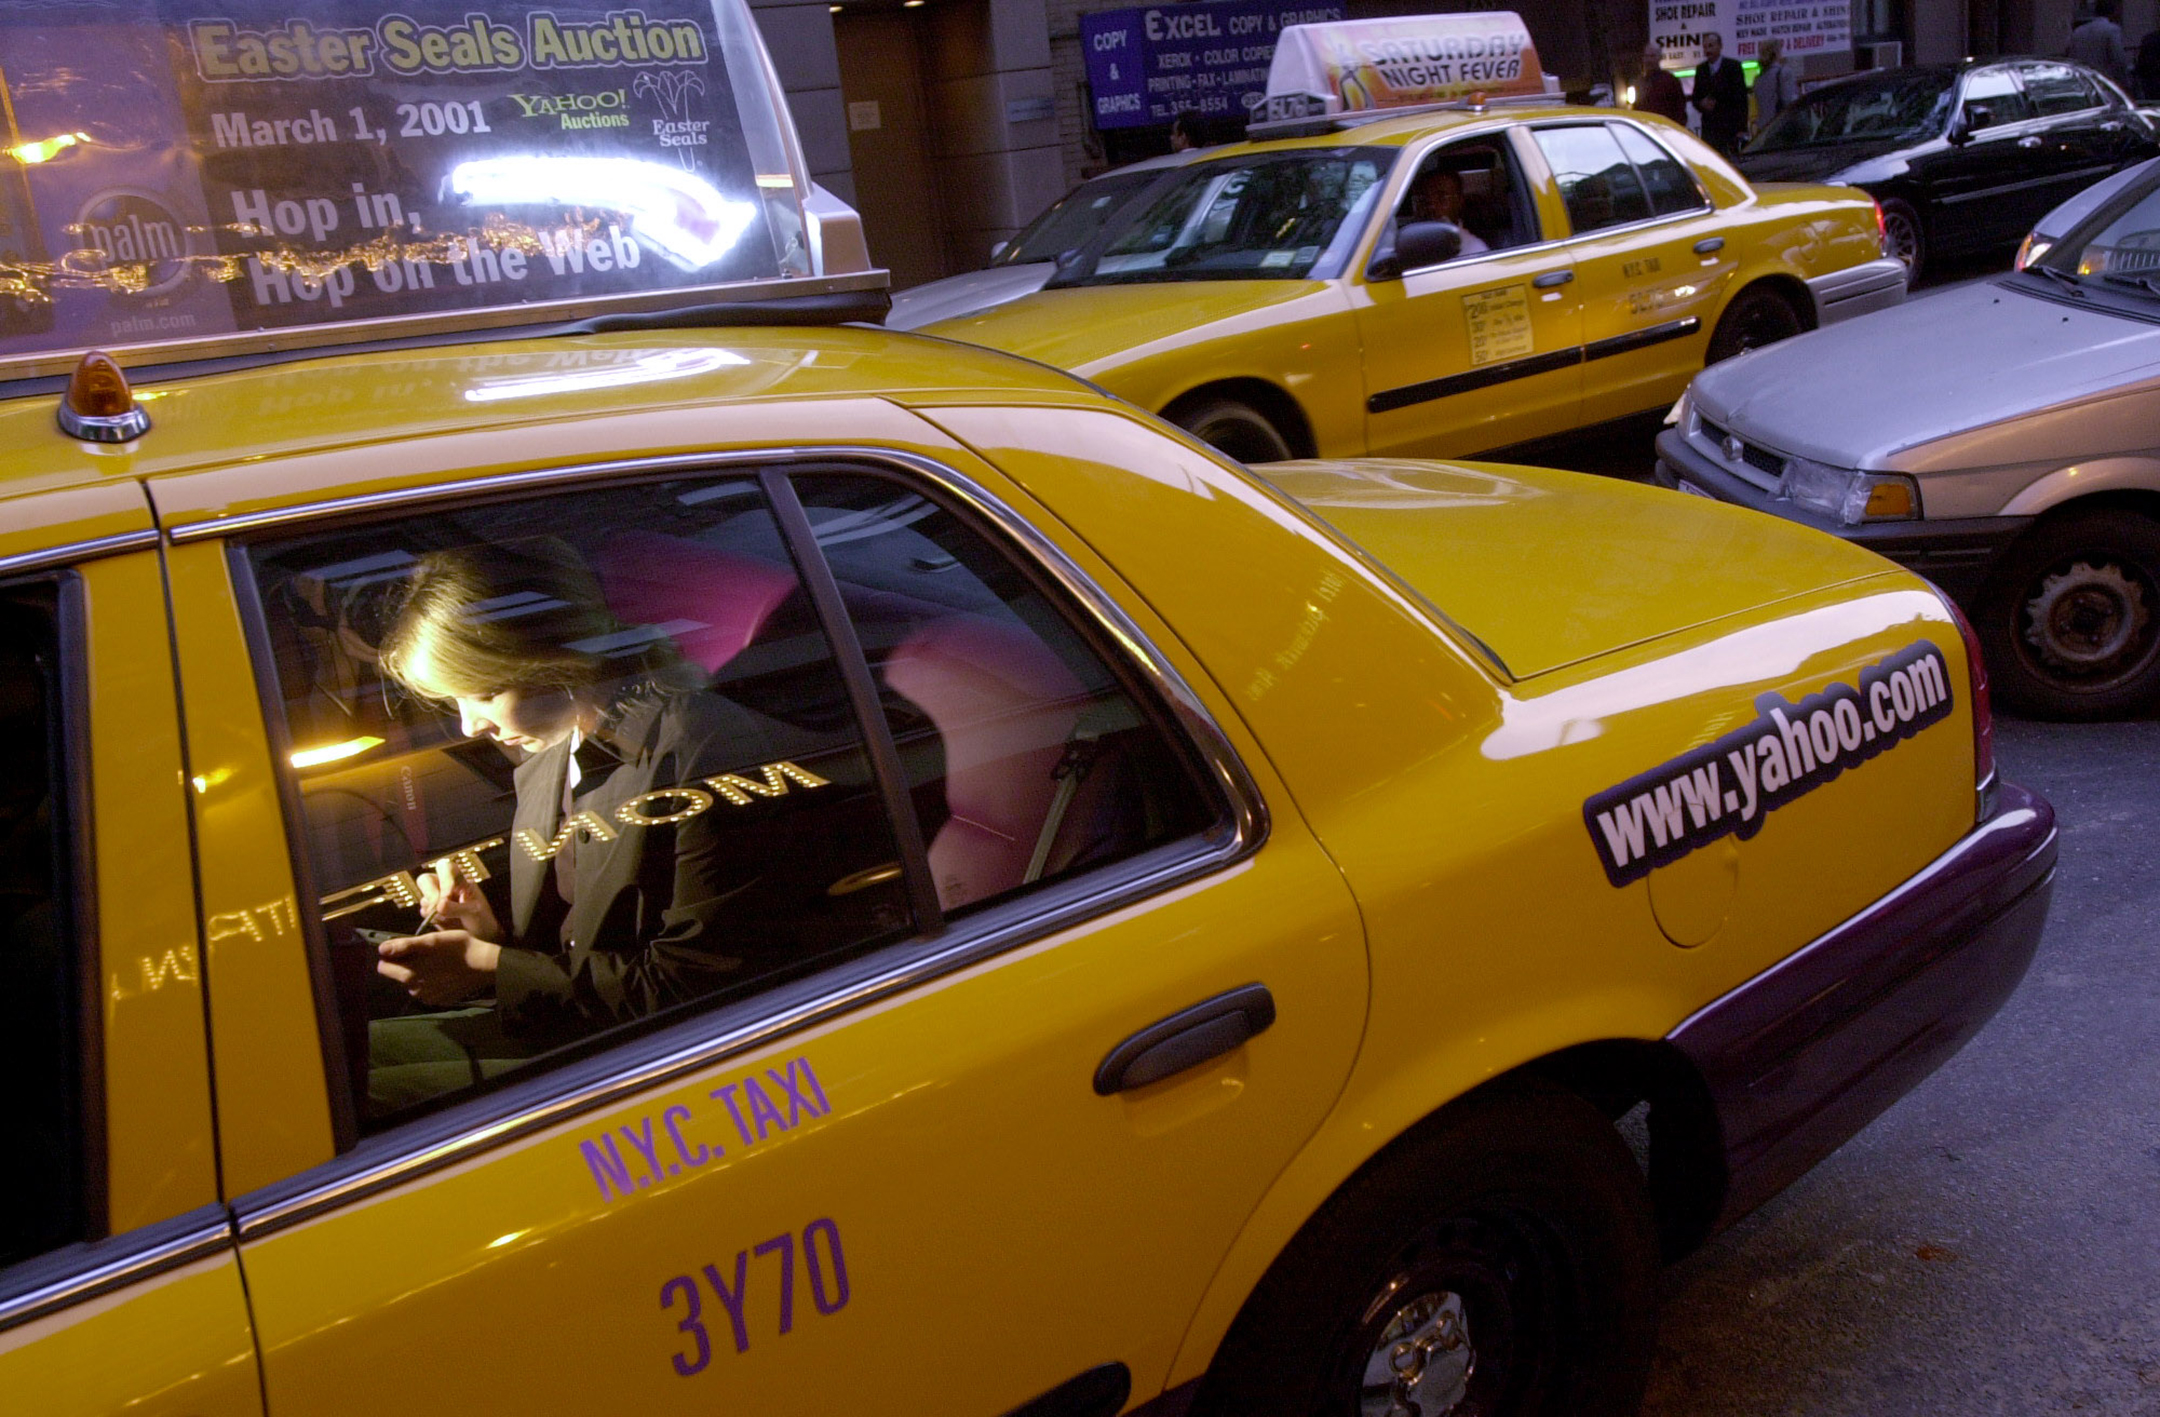 seen from the outside, a woman sitting in the back of a yellow taxicab looks at her device